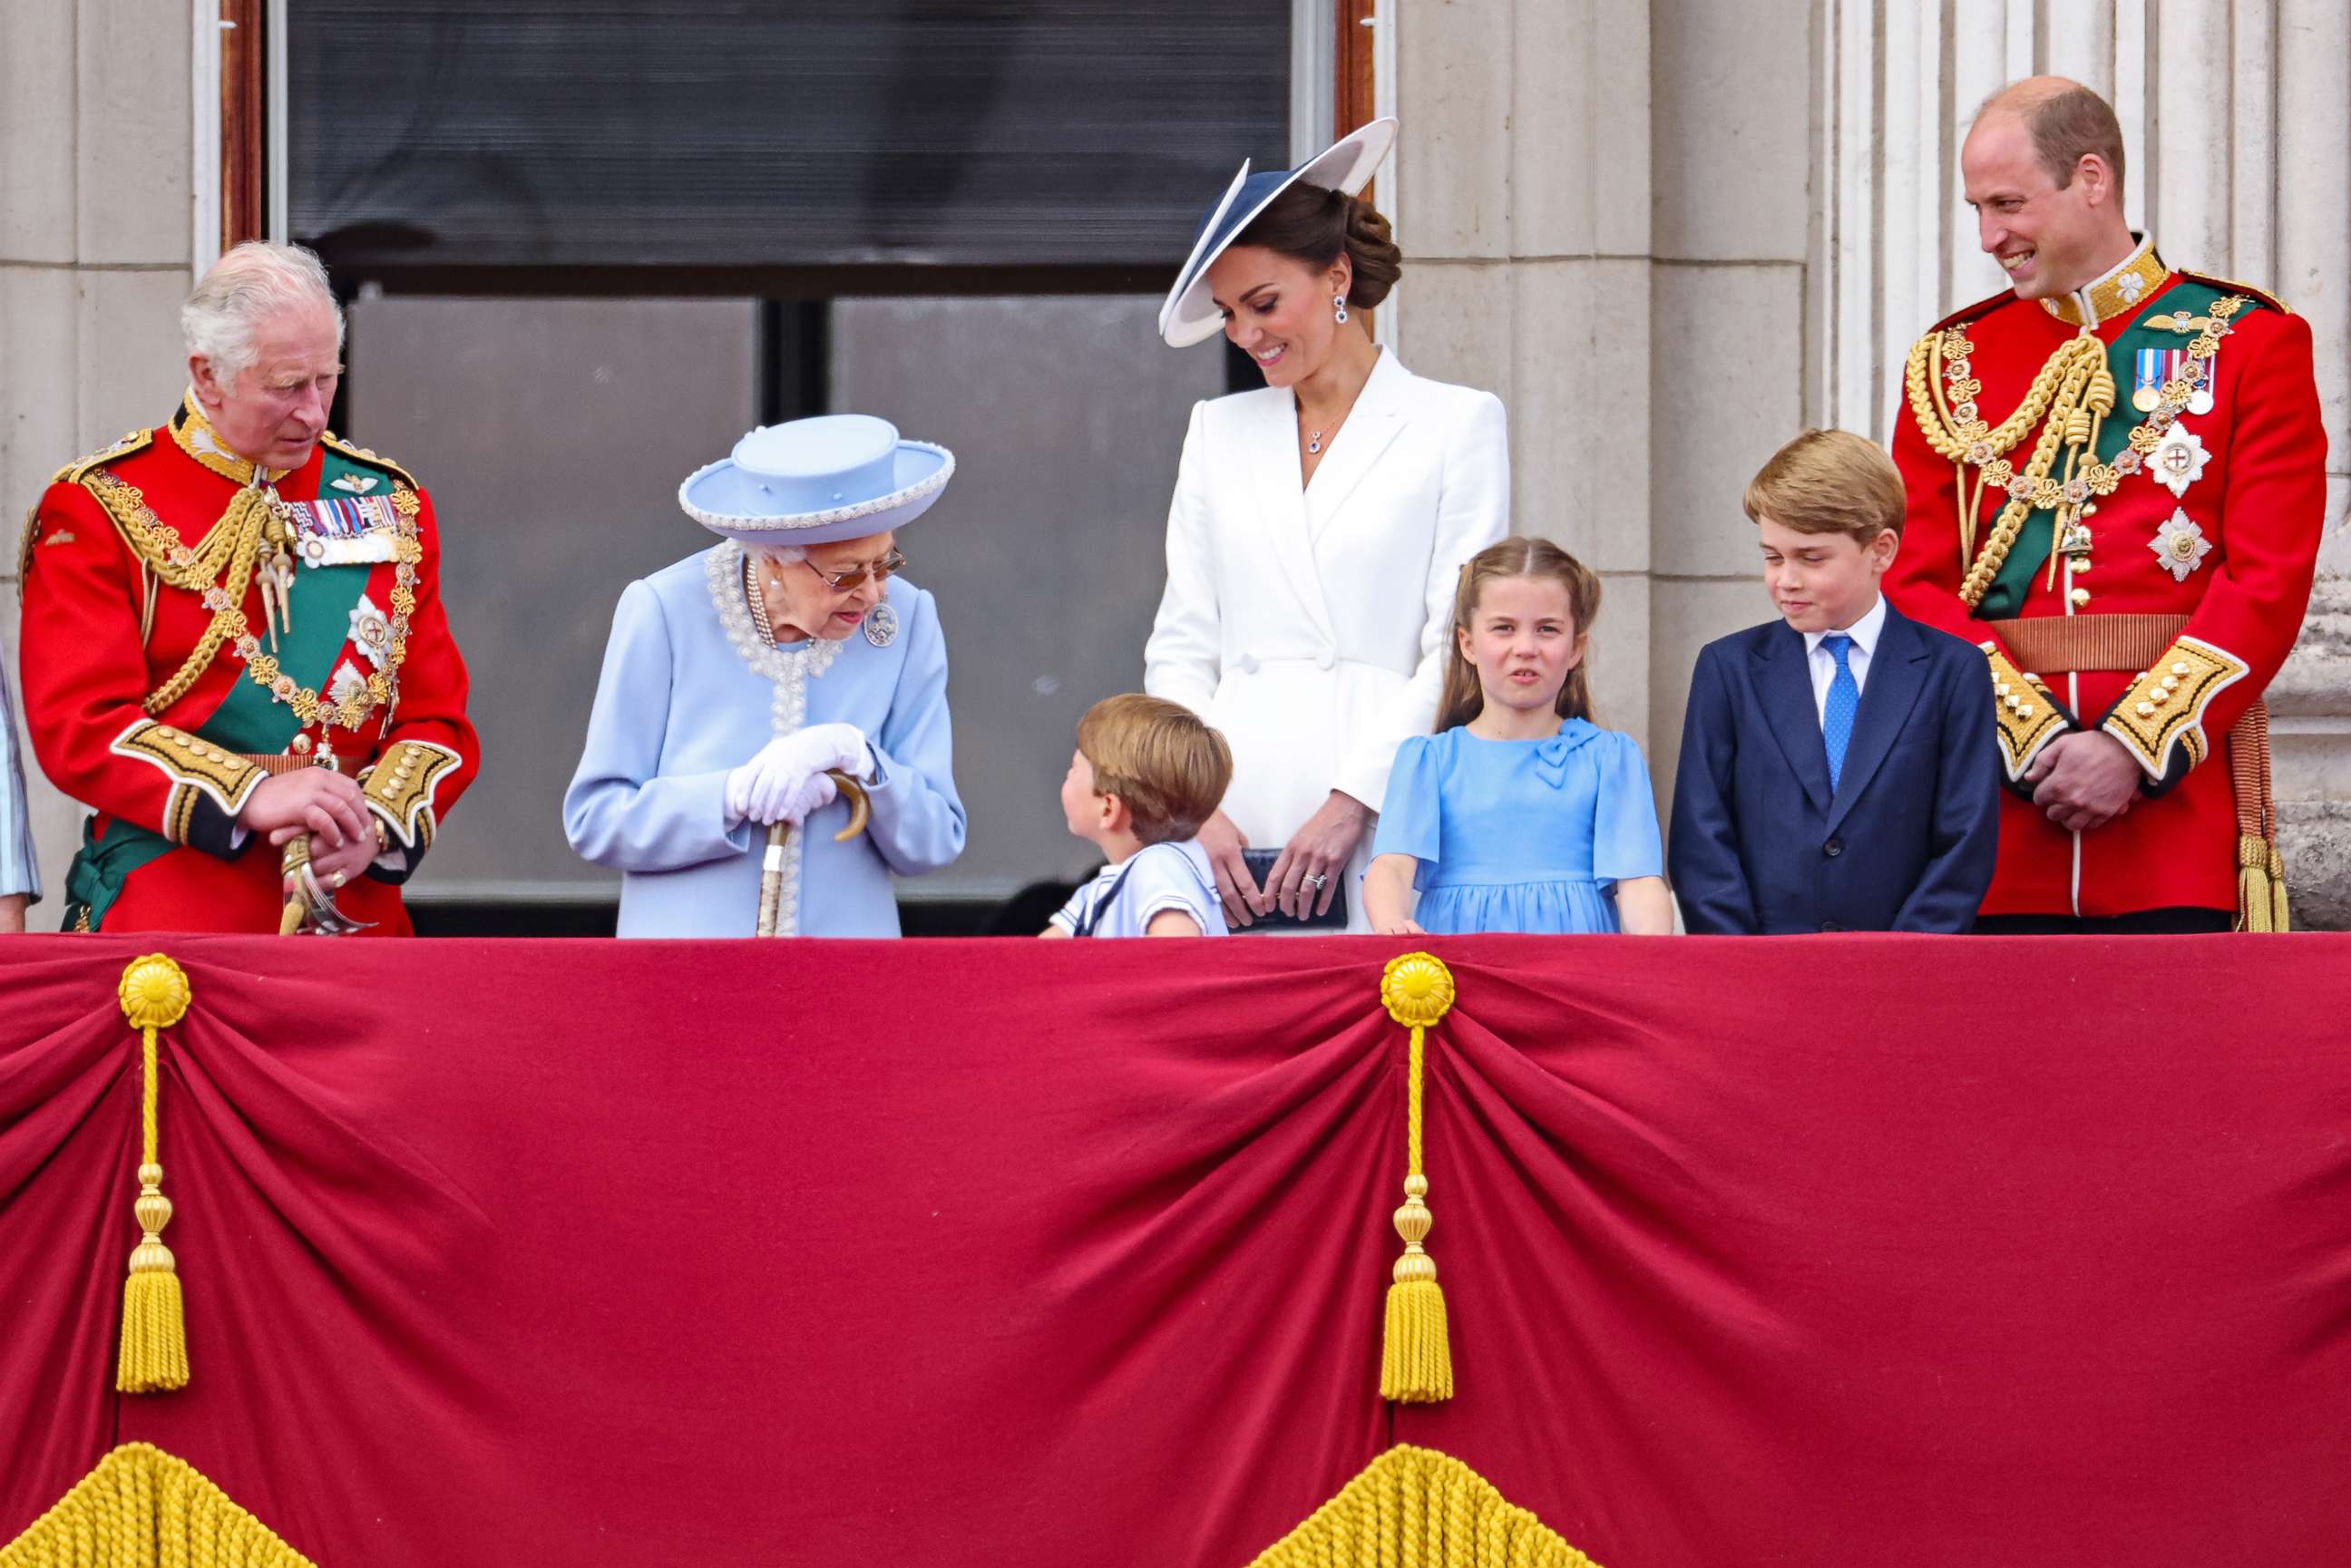 PHOTO: Prince Charles, Queen Elizabeth II, Prince Louis, Catherine, Duchess of Cambridge, Princess Charlotte, Prince George and Prince William on the balcony of Buckingham Palace during the Trooping the Color parade on June 2, 2022 in London.